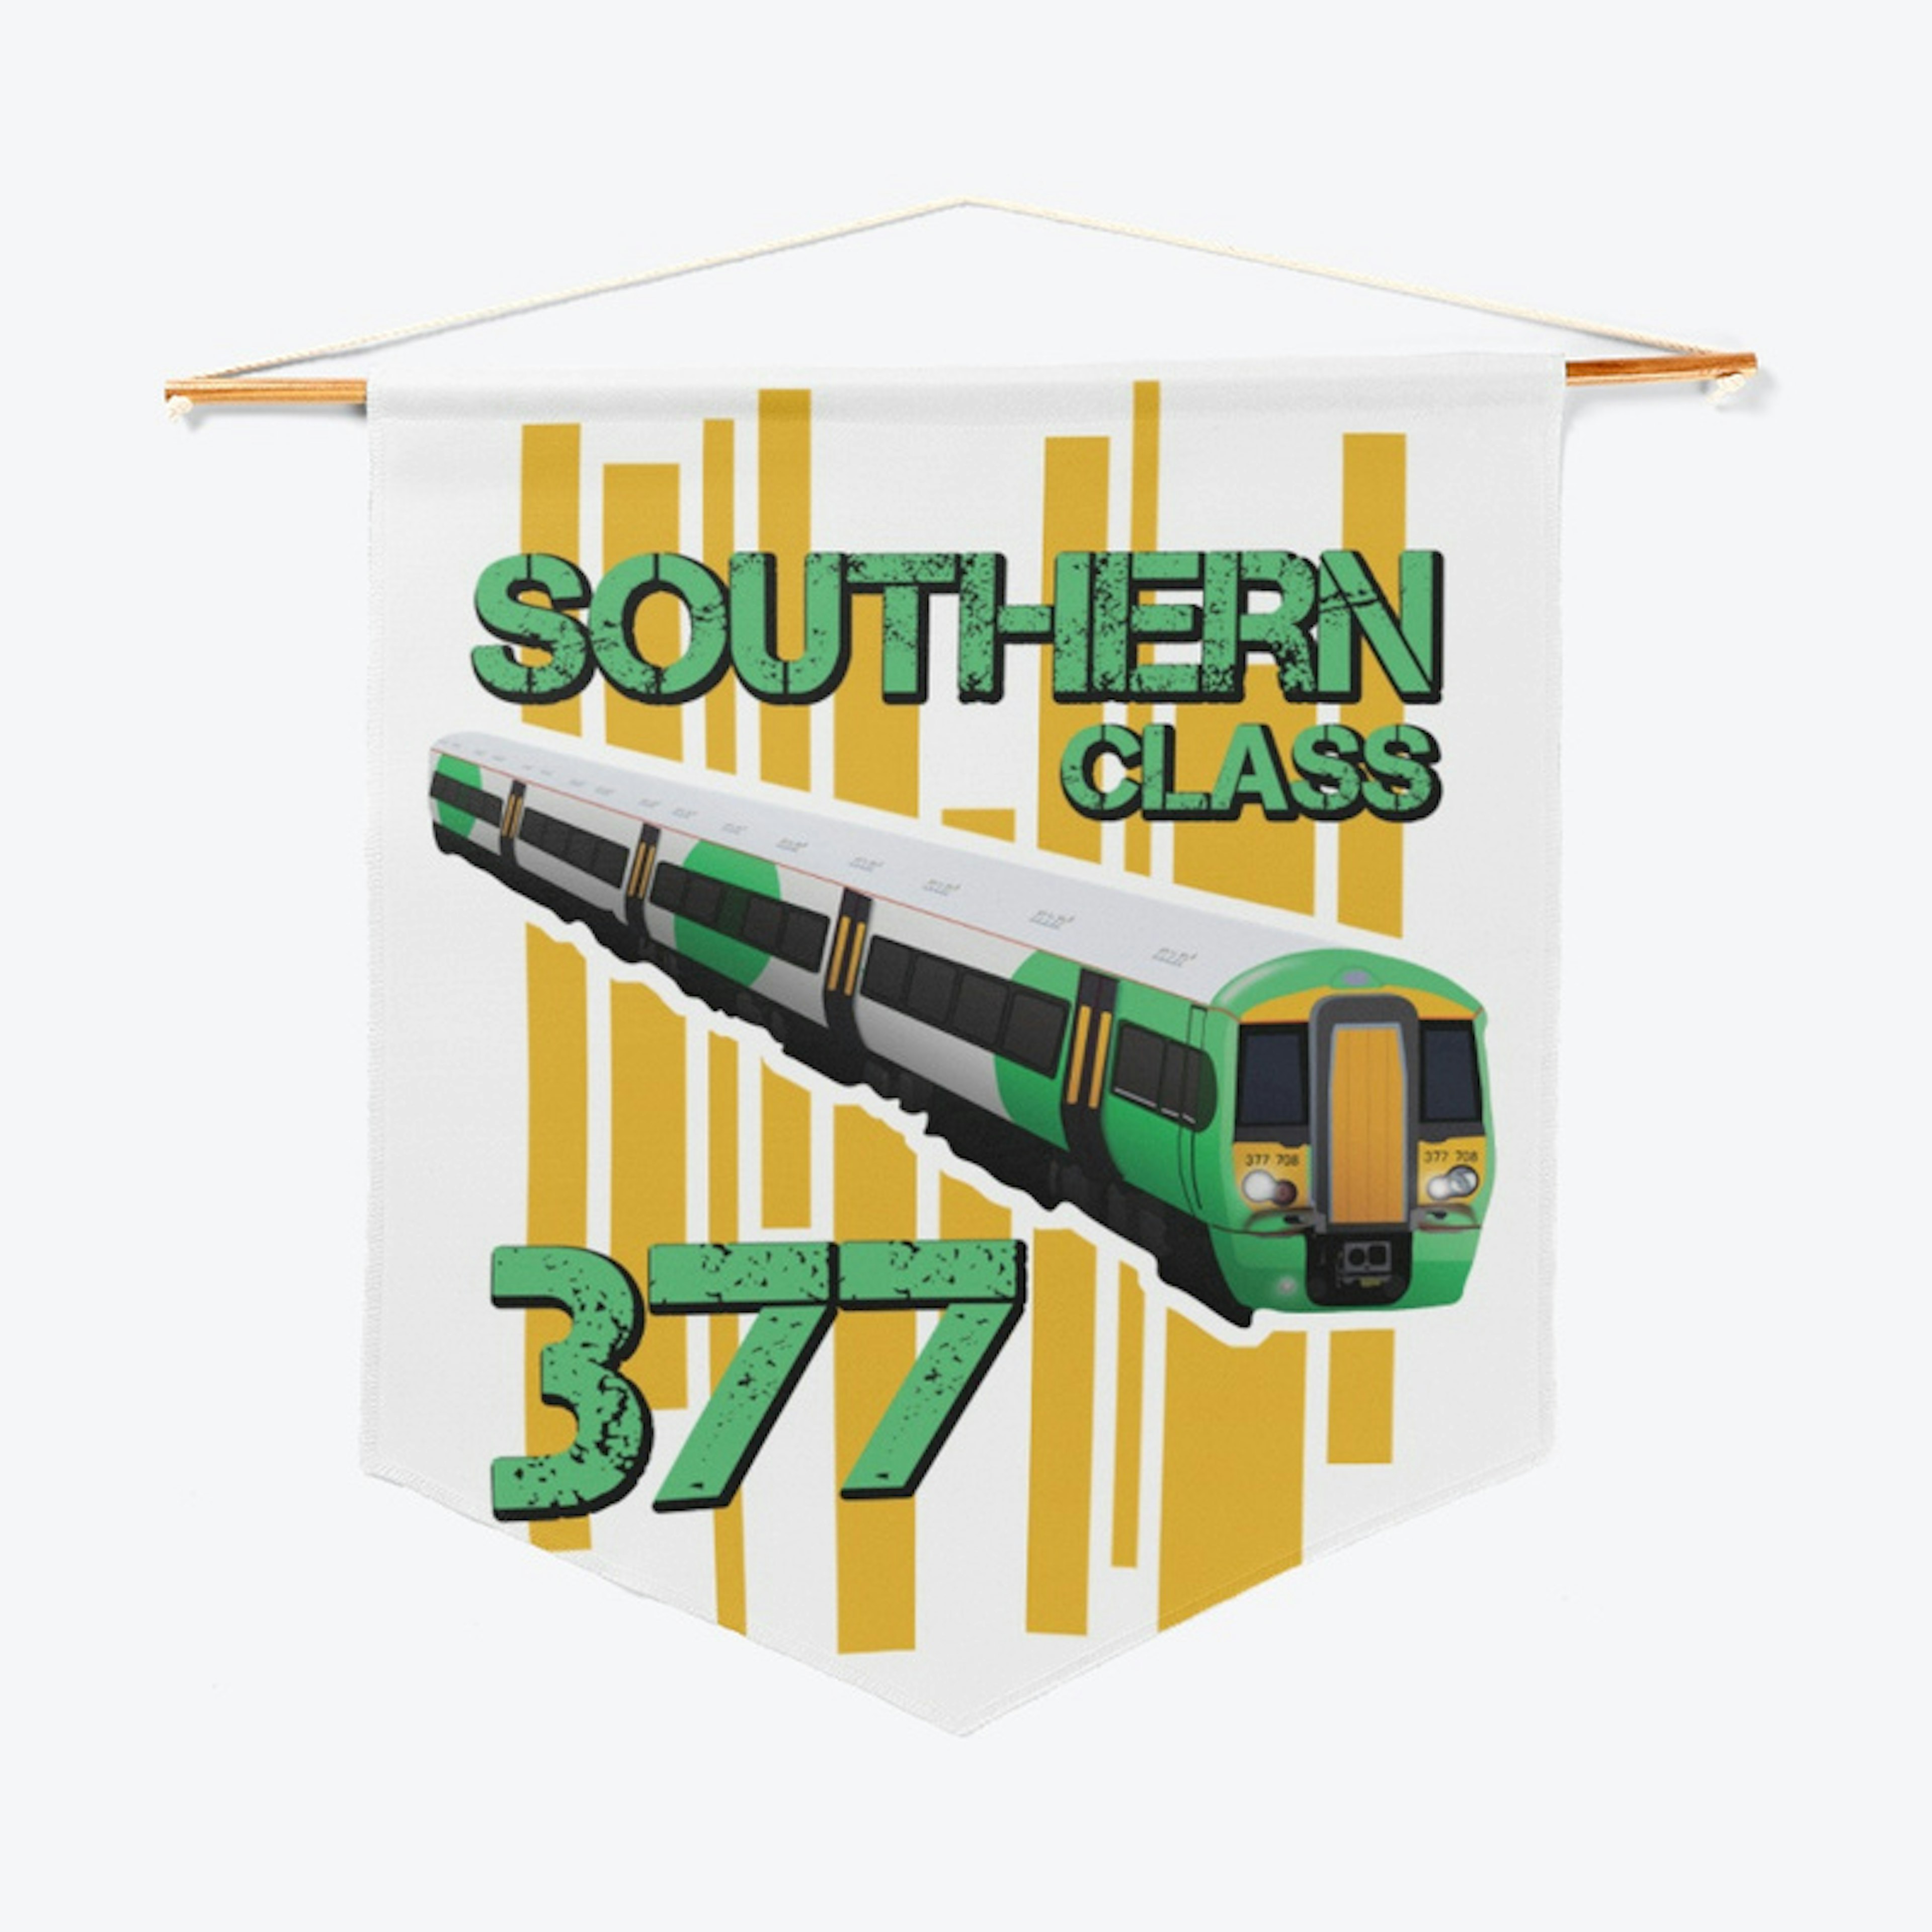 Southern Class 377 Pennant